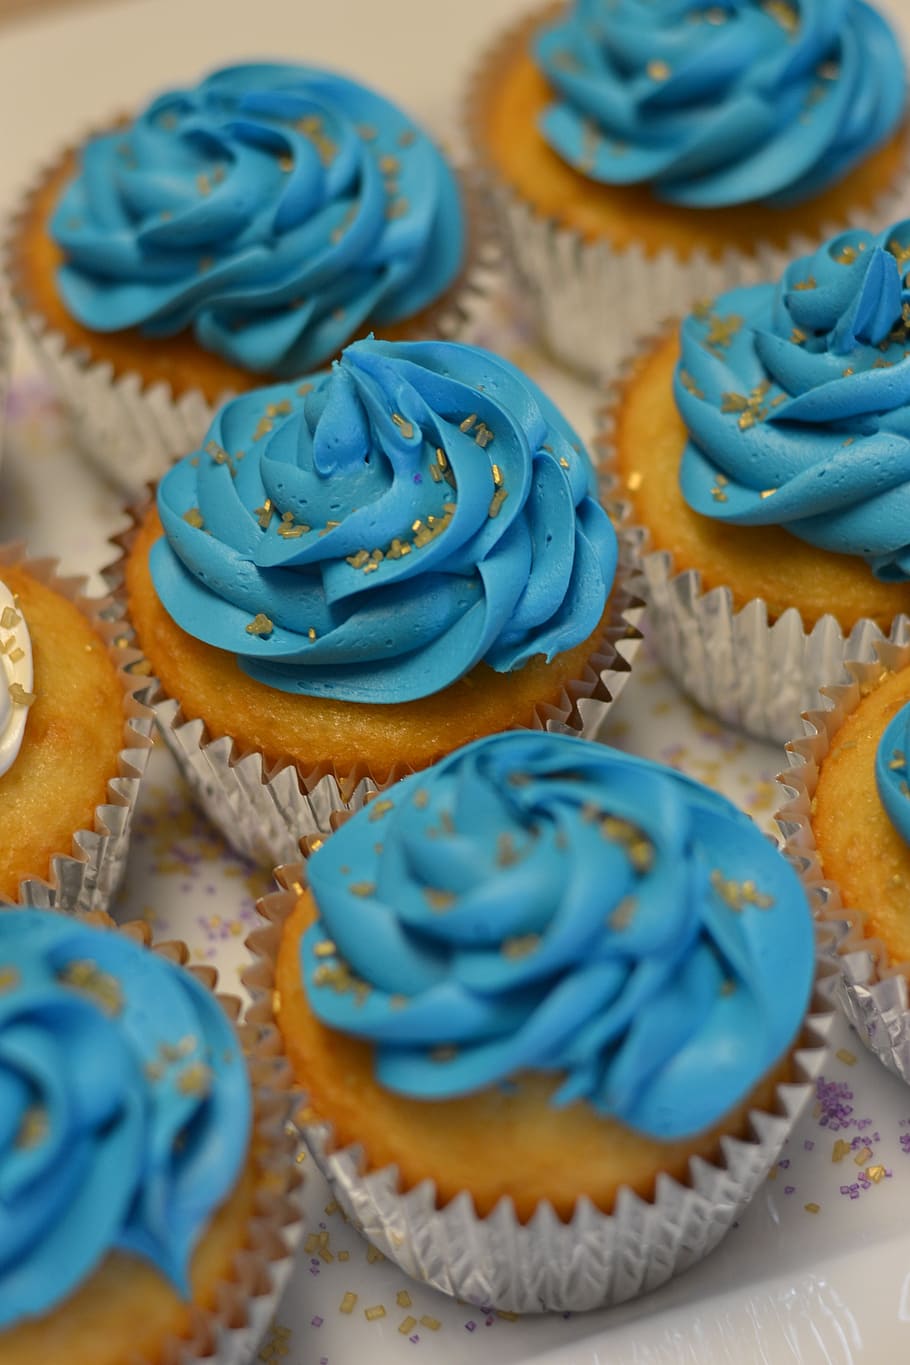 shift-tilt photography of cupcakes with blue icings, dessert, HD wallpaper